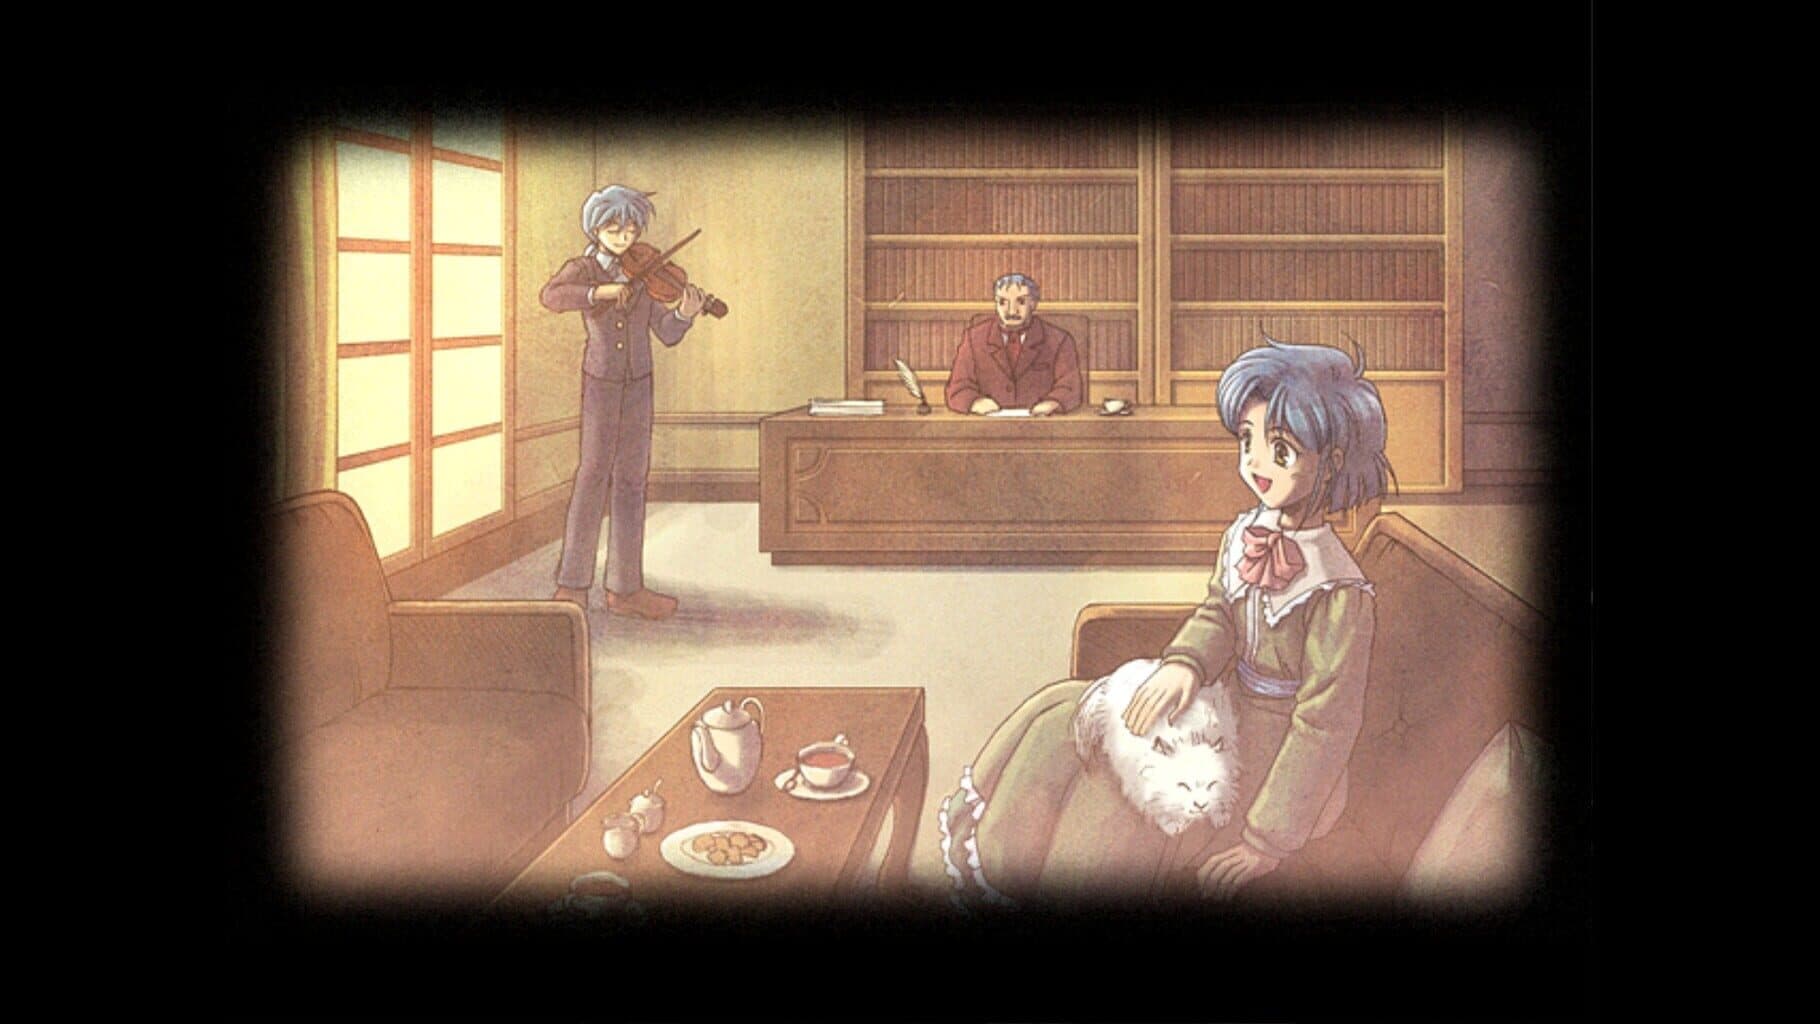 The Legend of Heroes: Trails in the Sky the 3rd Image